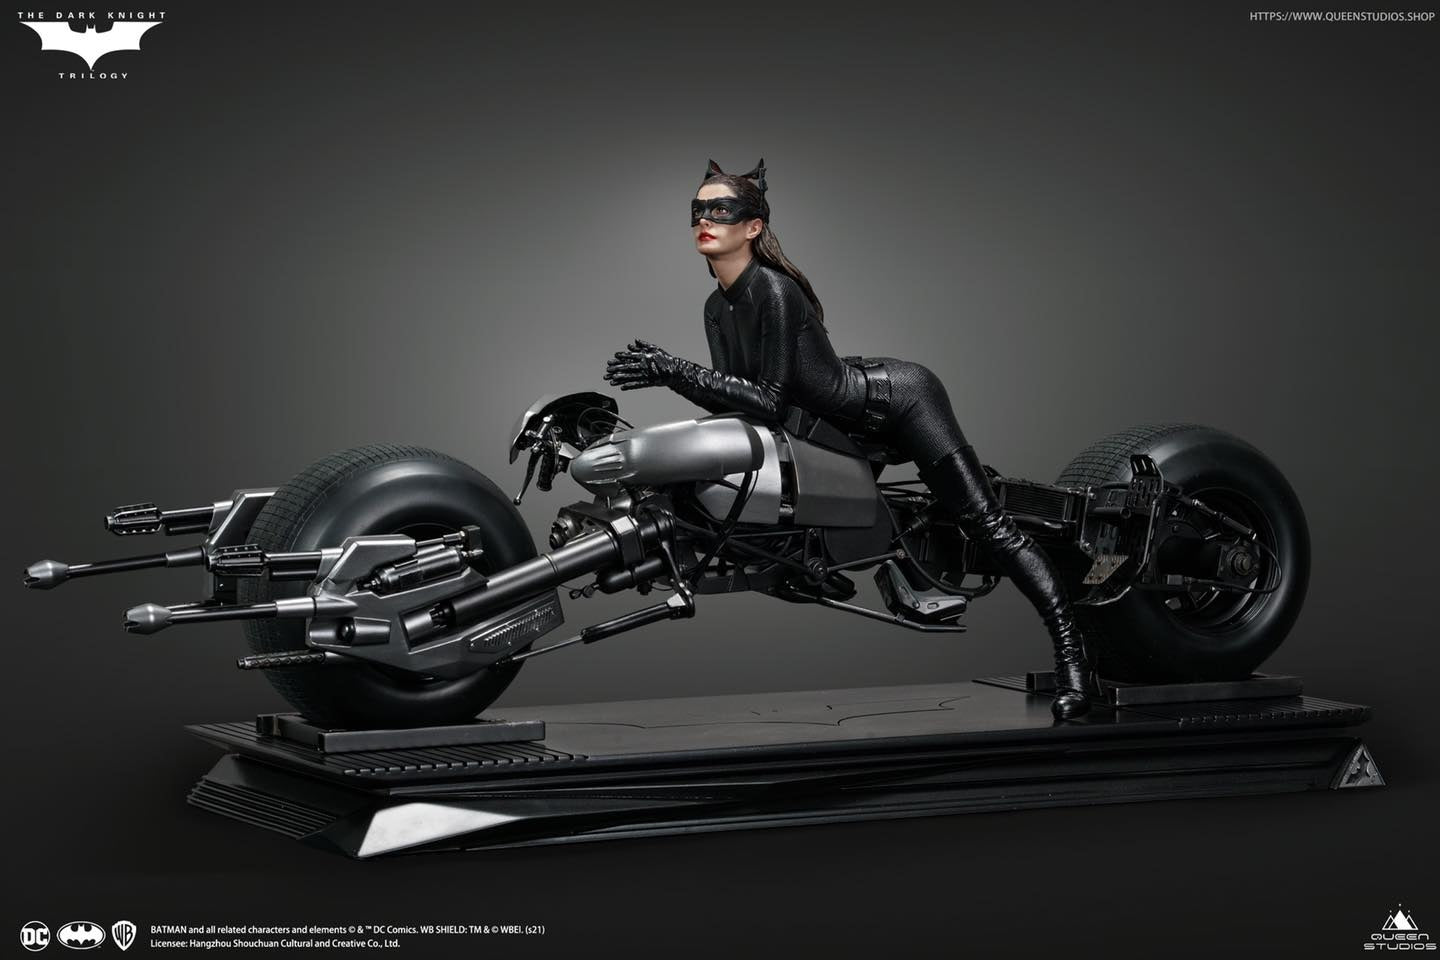 QUEEN STUDIOS THE DARK KNIGHT RISES SELINA KYLE CATWOMAN ON BATPOD 1/3 STATUE - Anotoys Collectibles